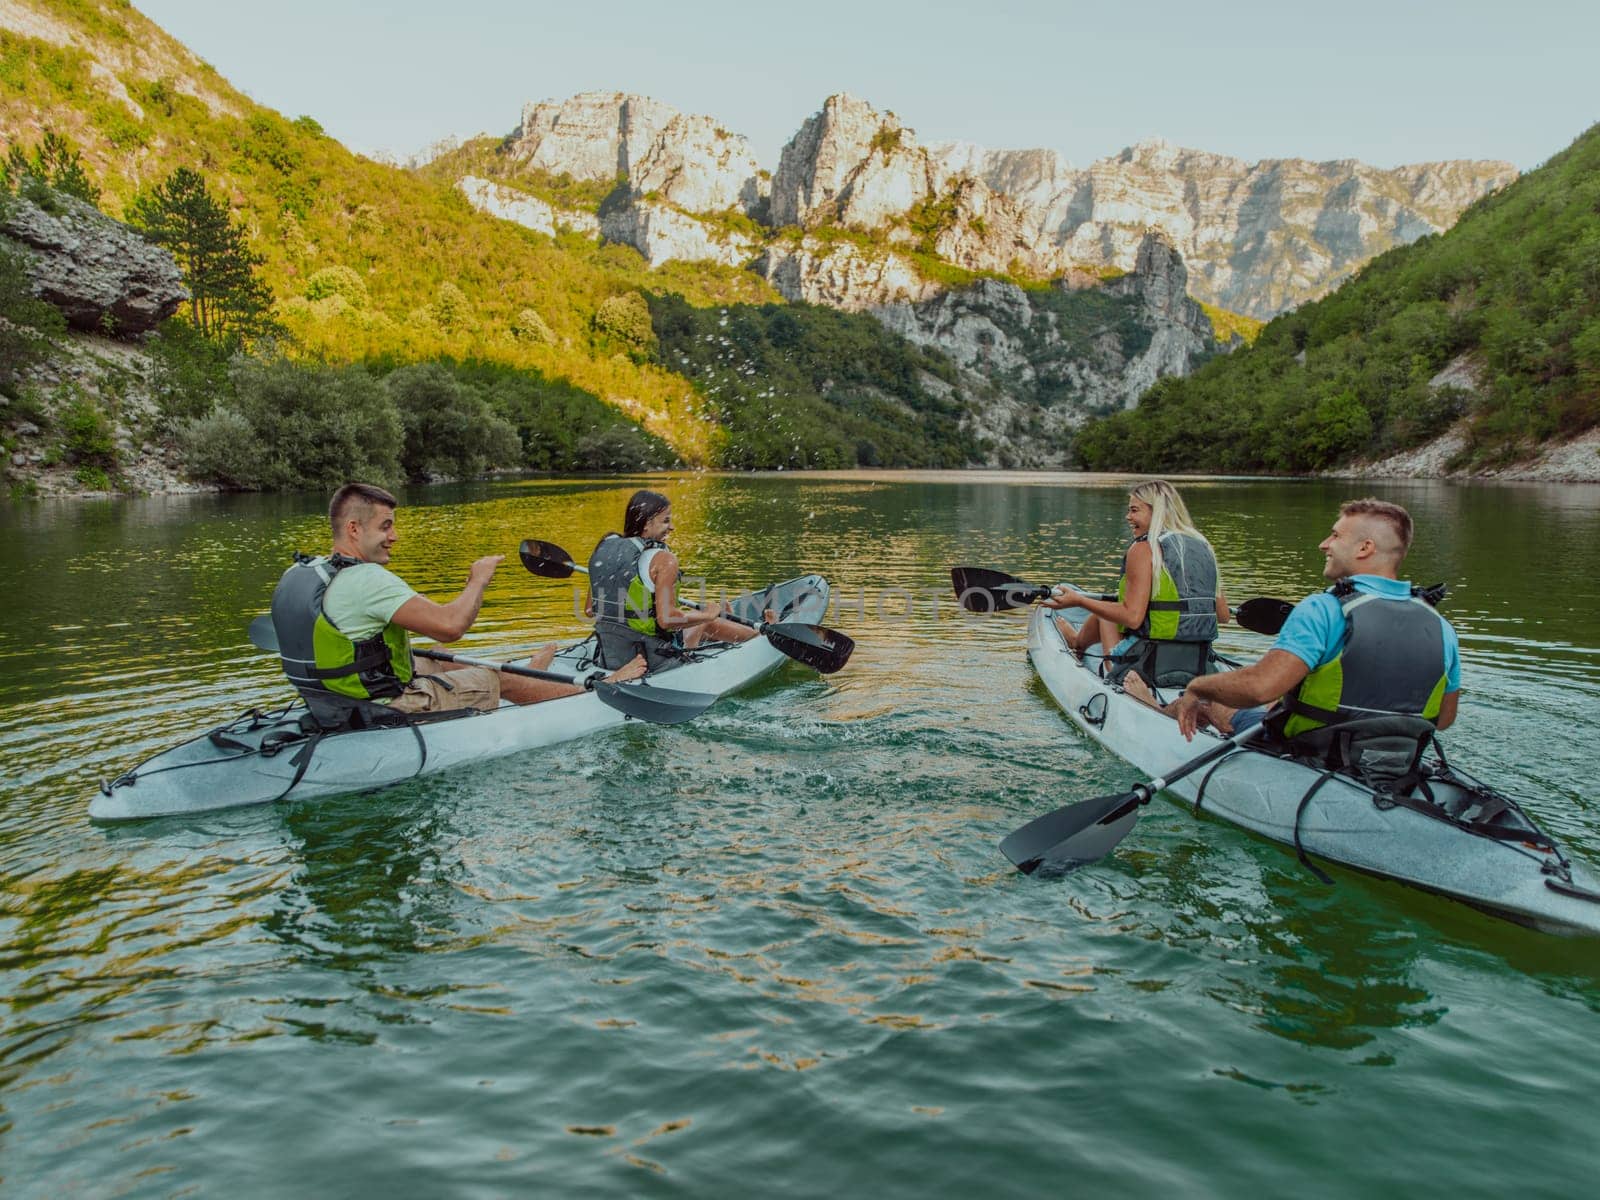 A group of friends enjoying having fun and kayaking while exploring the calm river, surrounding forest and large natural river canyons by dotshock